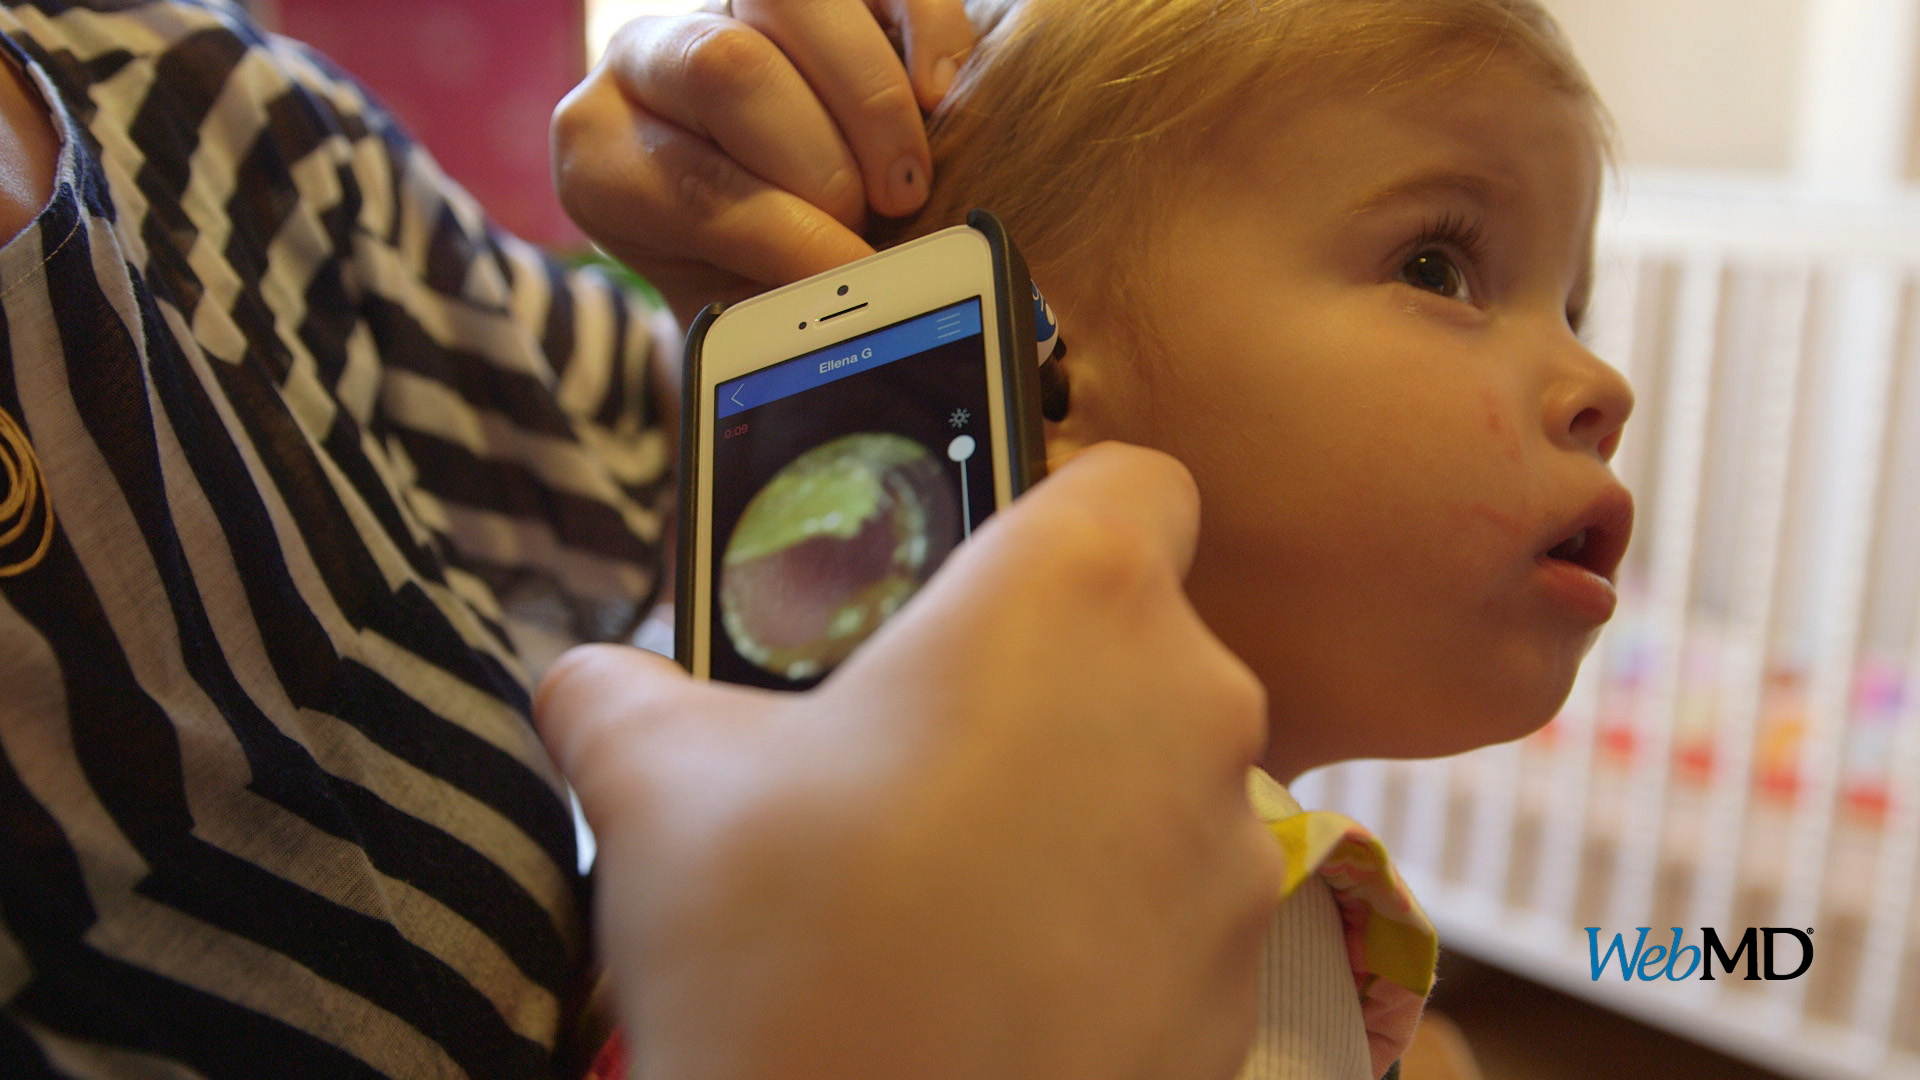 See a device that allows the wireless diagnosis of ear infections